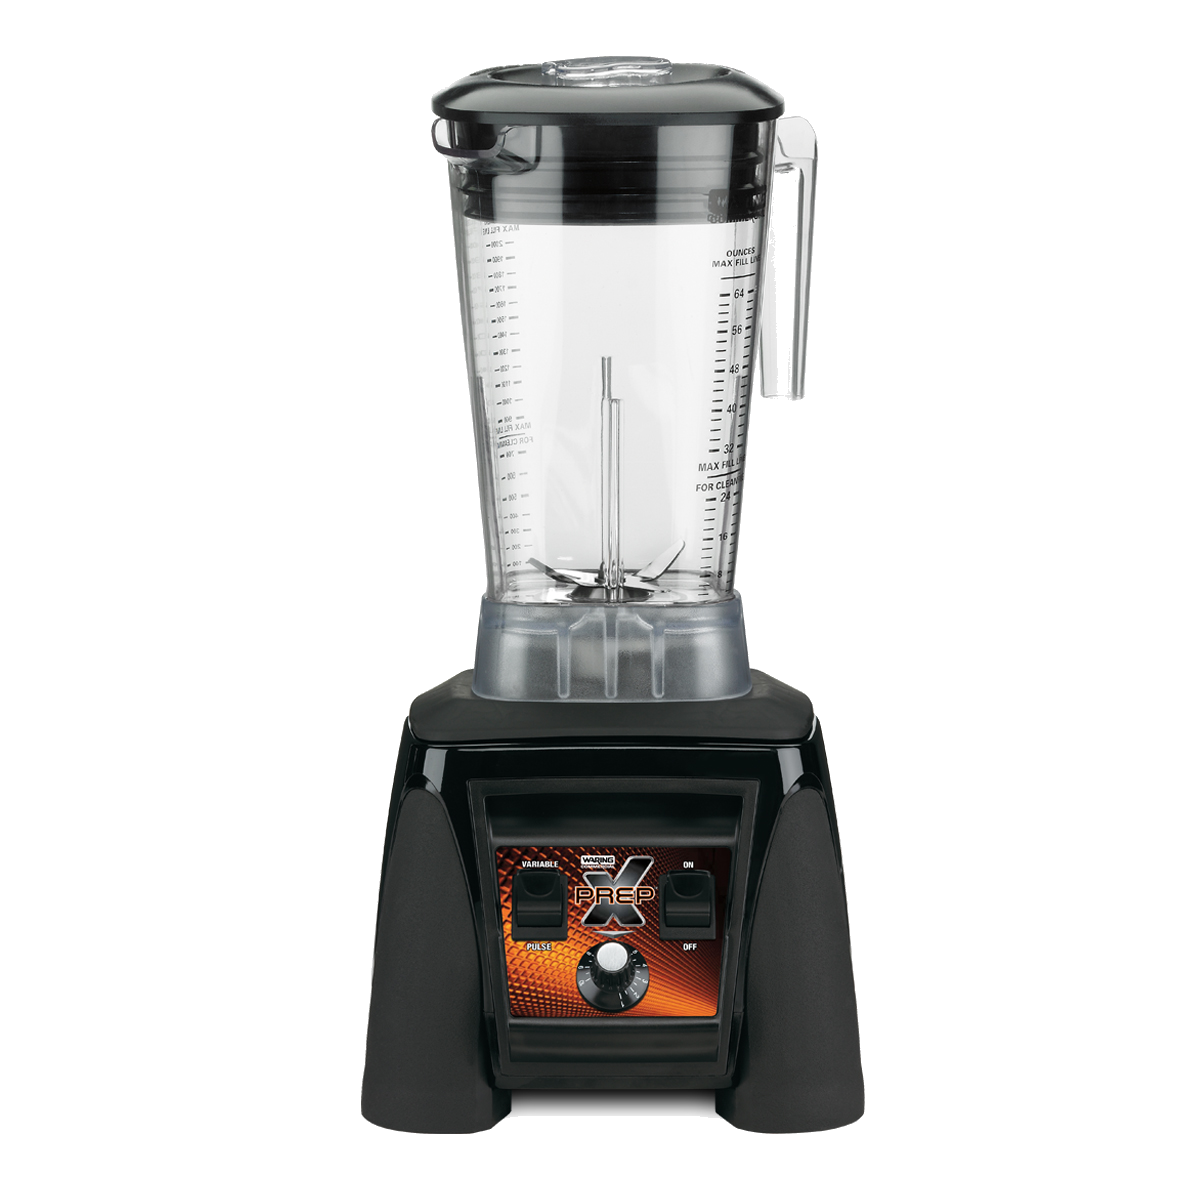  XPREP® Hi-Power Variable-Speed Food Blender with 64 oz. Copolyester Container – Made in the USA